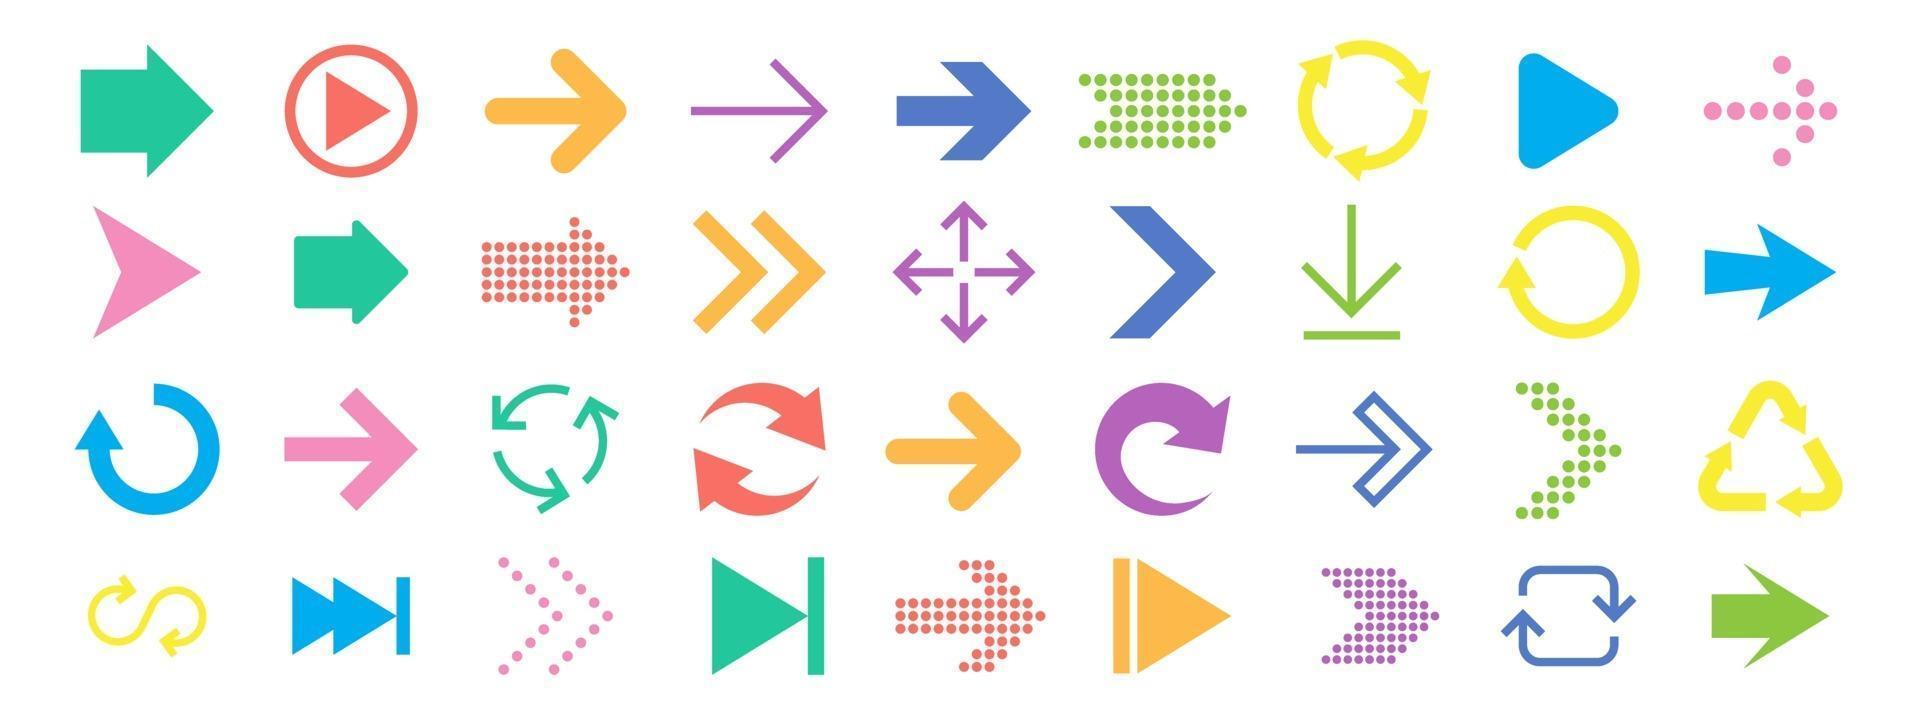 Arrow sign icon set. Collection of arrows for web design, mobile apps, interface. vector